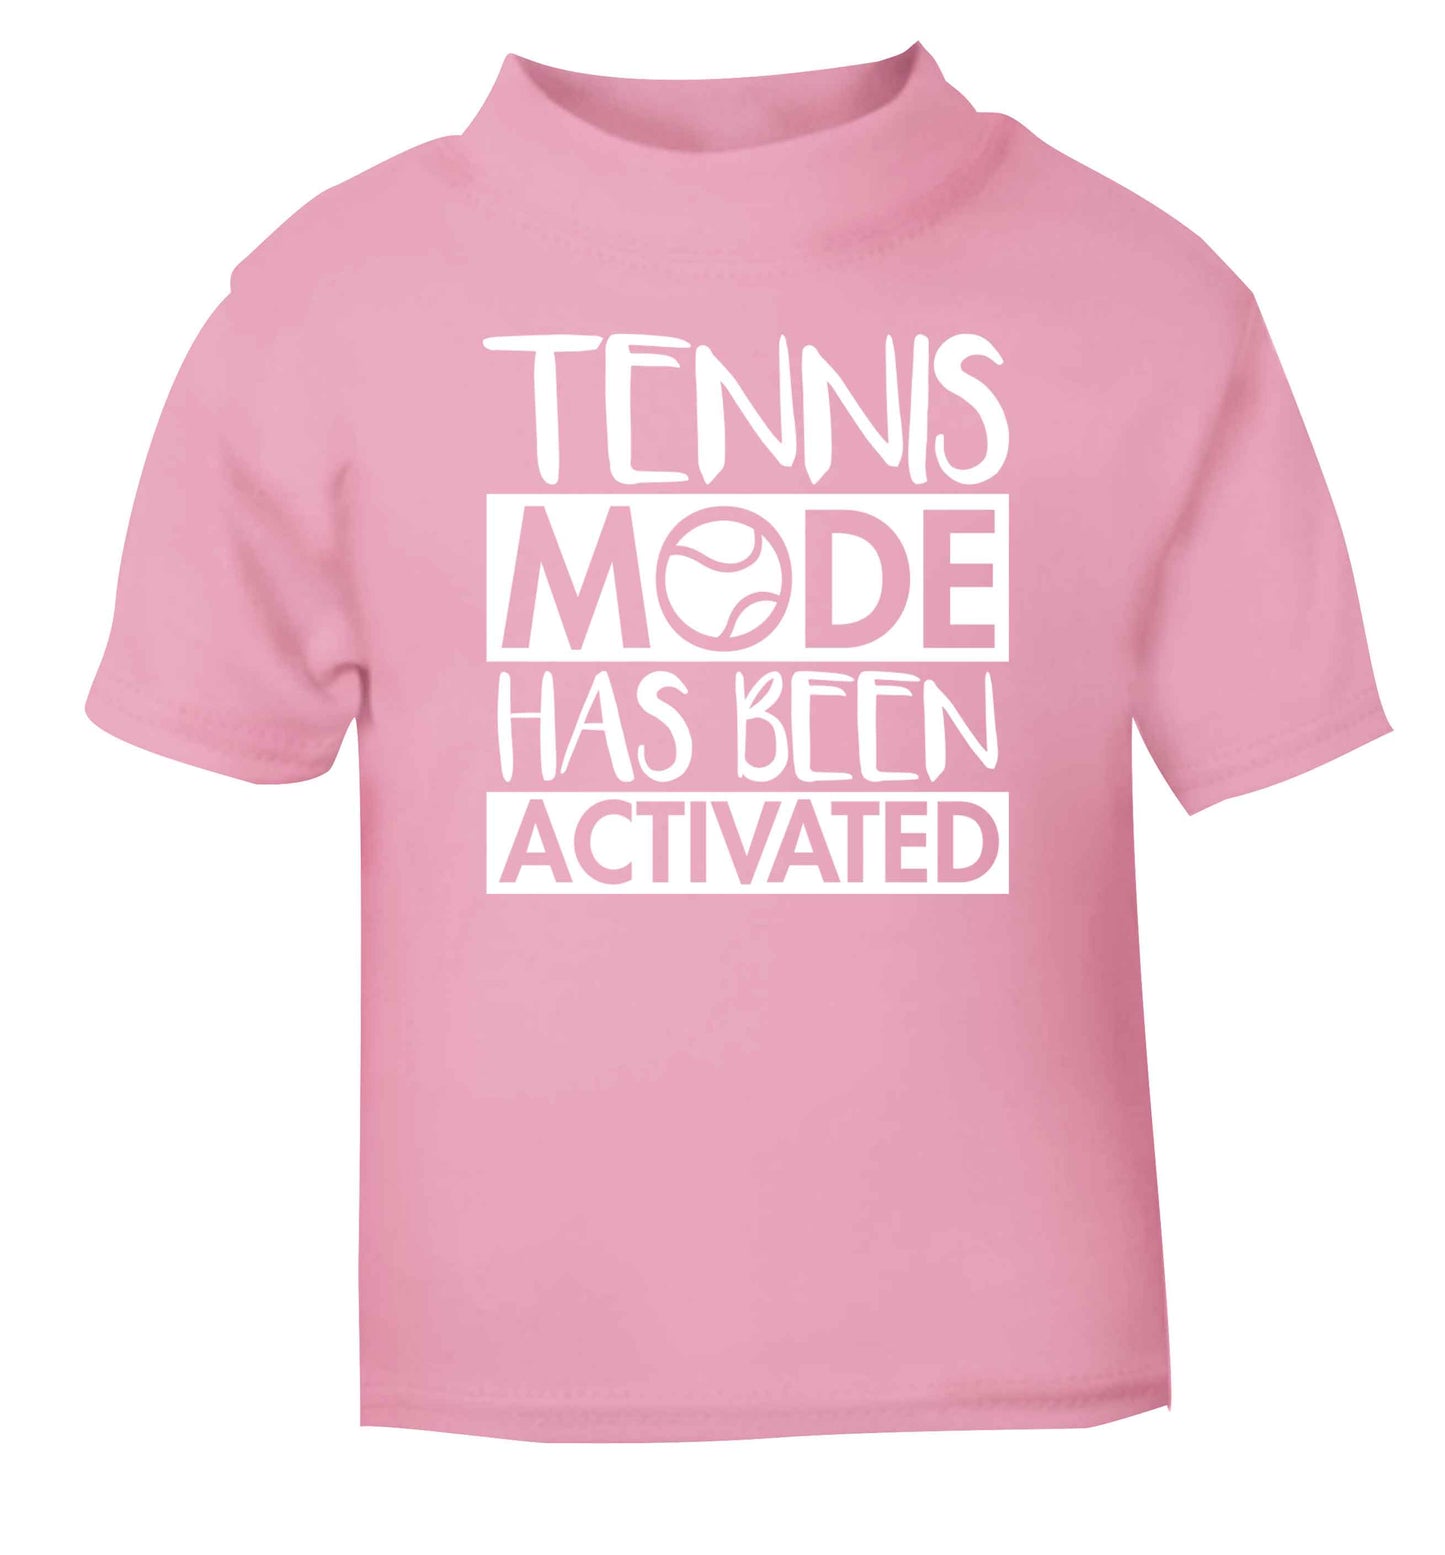 Tennis mode has been activated light pink Baby Toddler Tshirt 2 Years